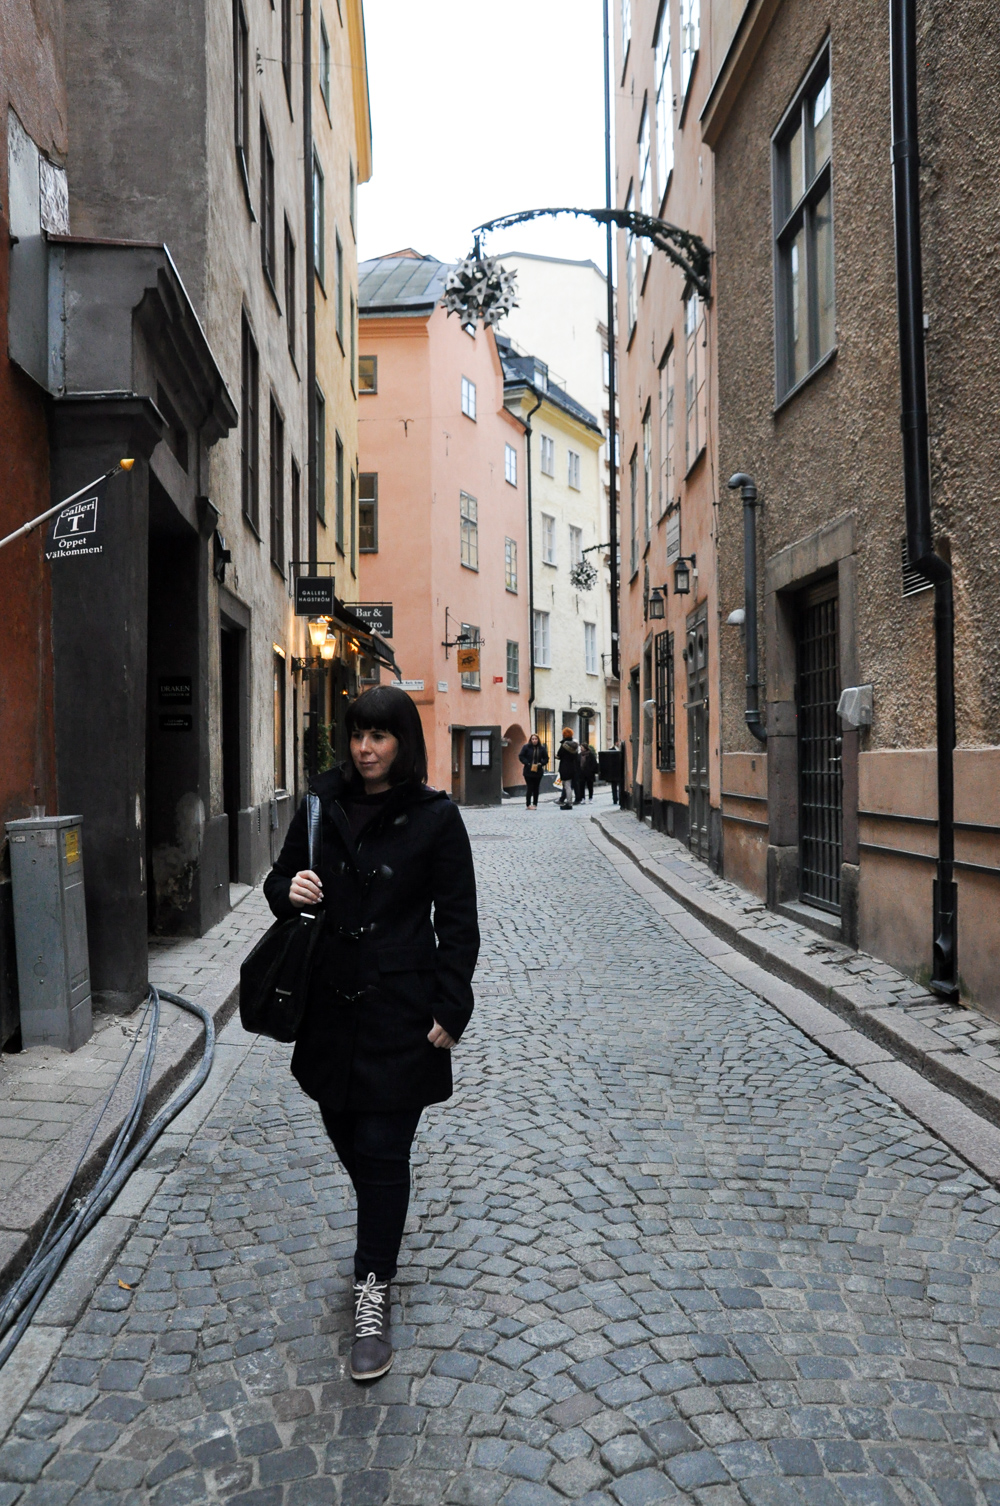 Walking the streets of Gamla Stan, Stockholm's old town.